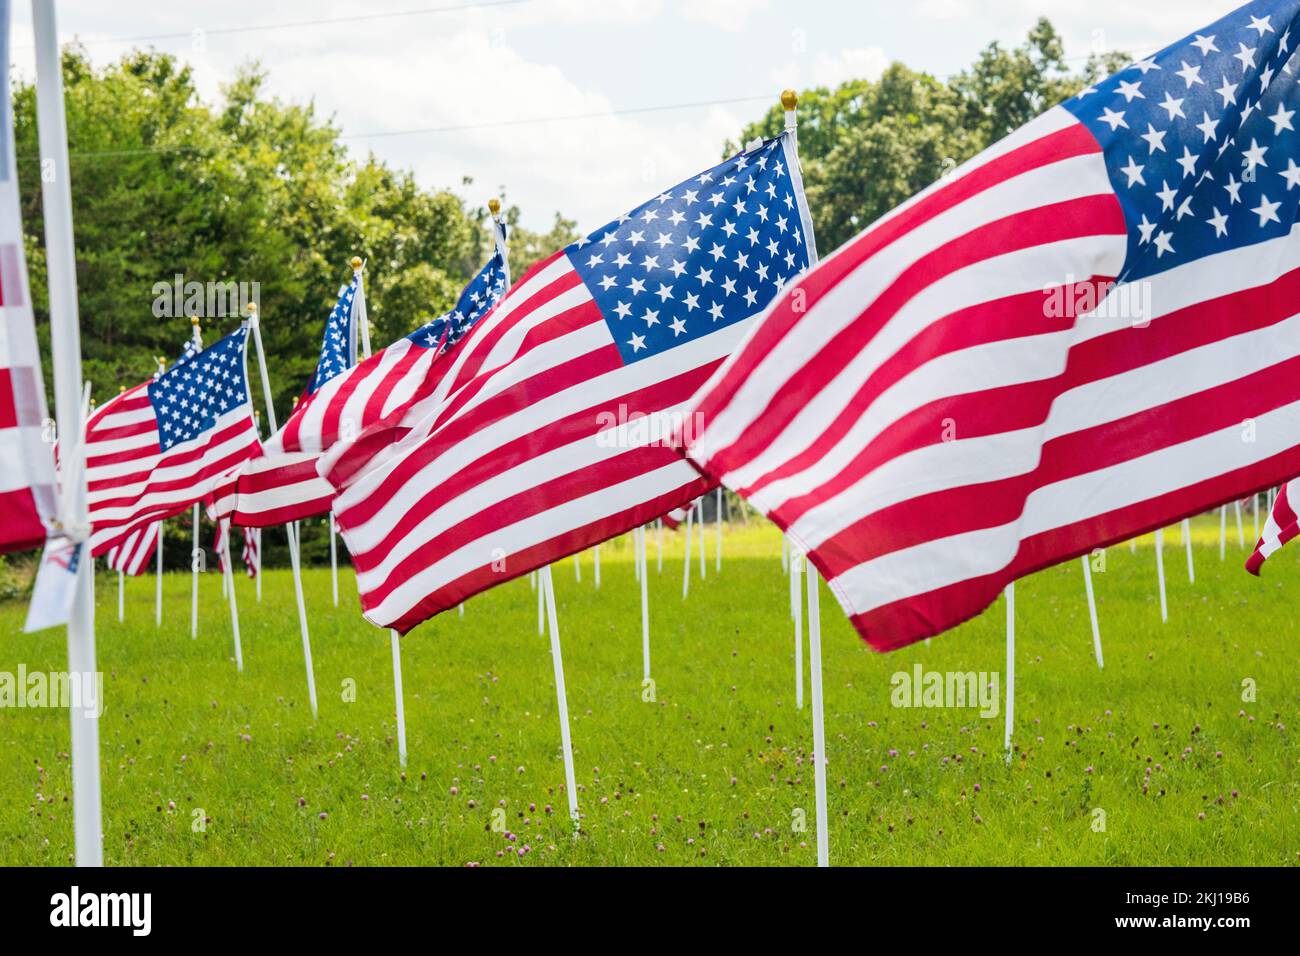 Hundreds of American flags flutter in a field Stock Photo